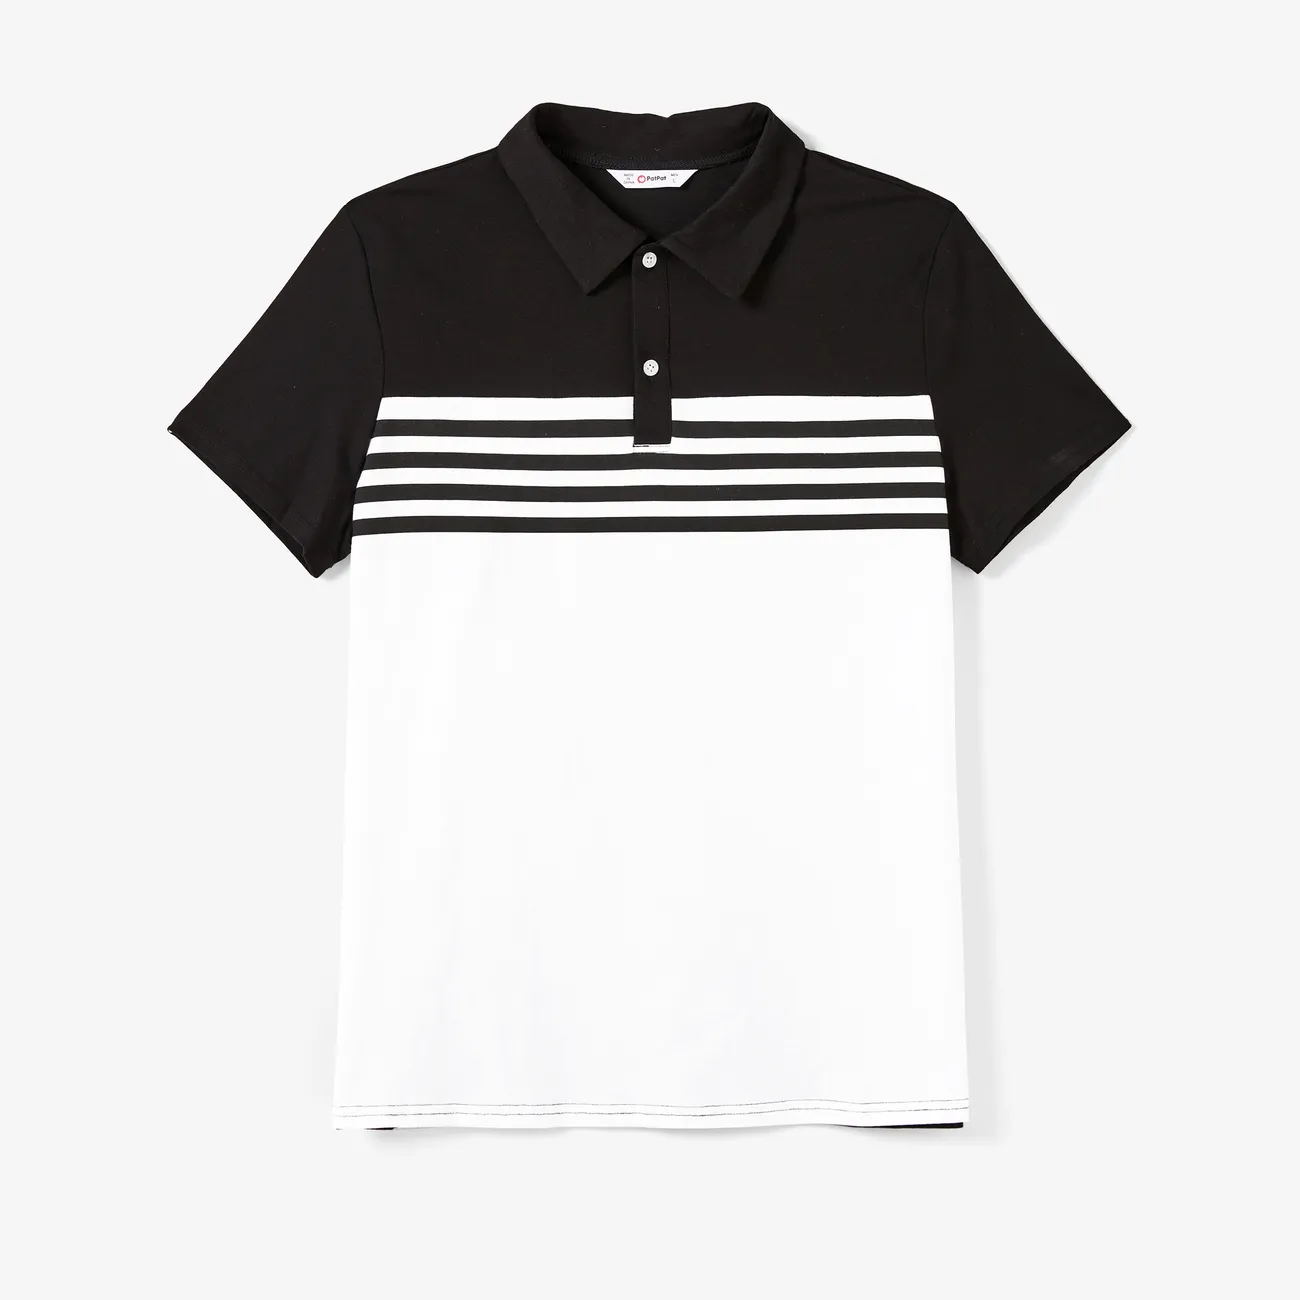 Family Matching Colorblock Polo Shirt and Stripe Dye-Tie High Neck Halter Belted Dress Sets BlackandWhite big image 1